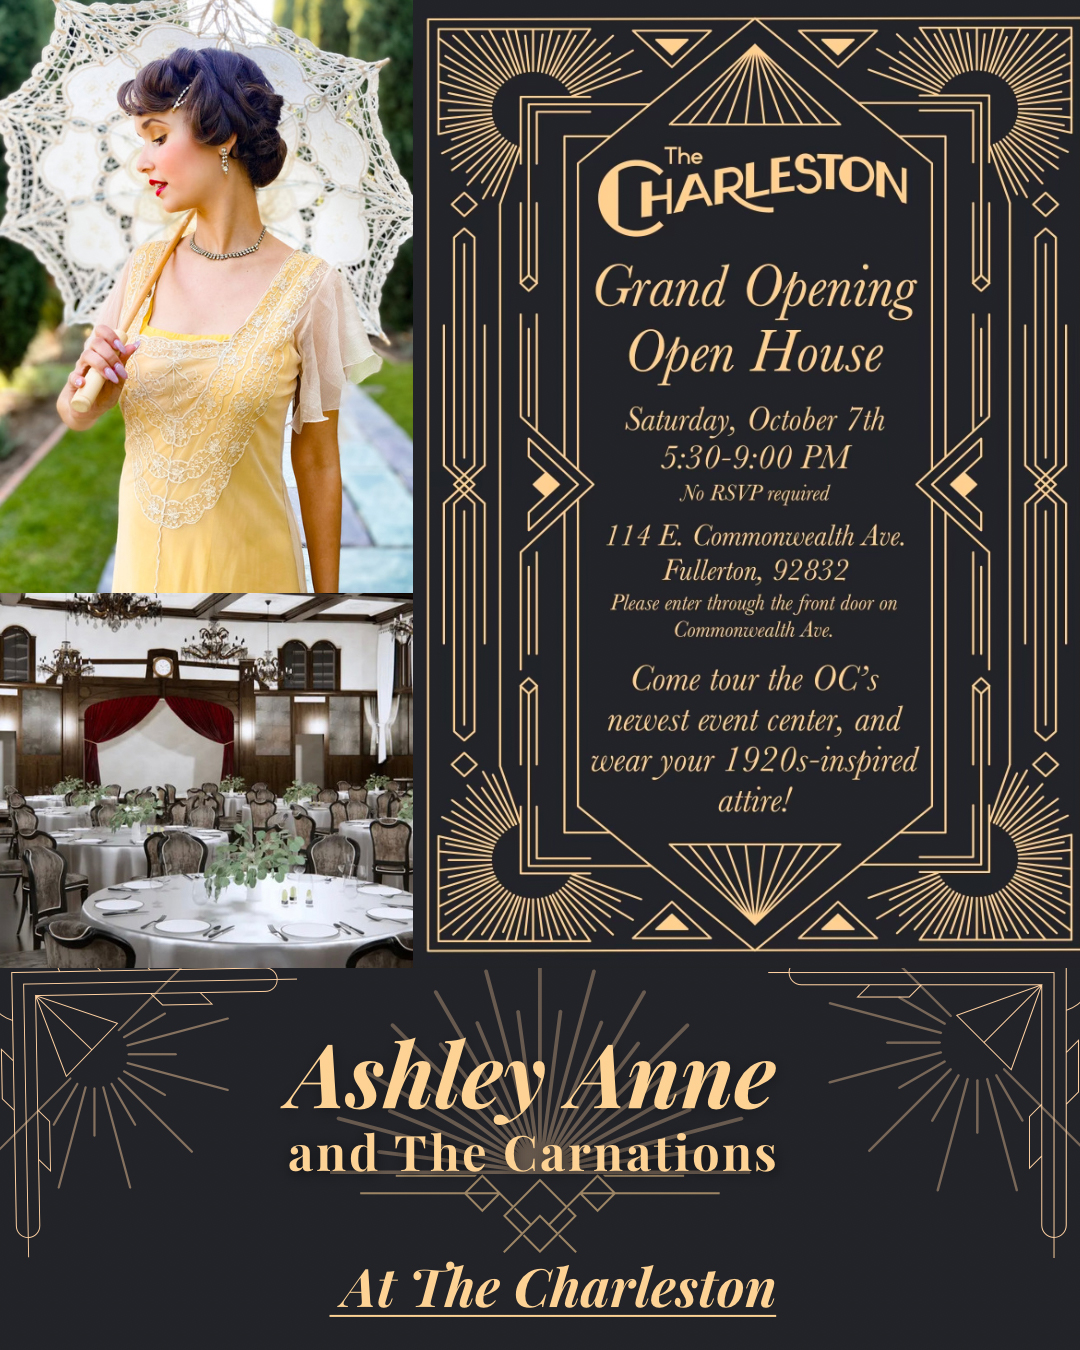 Charleston + Ashley Anne and The Carnations Grand Opening!